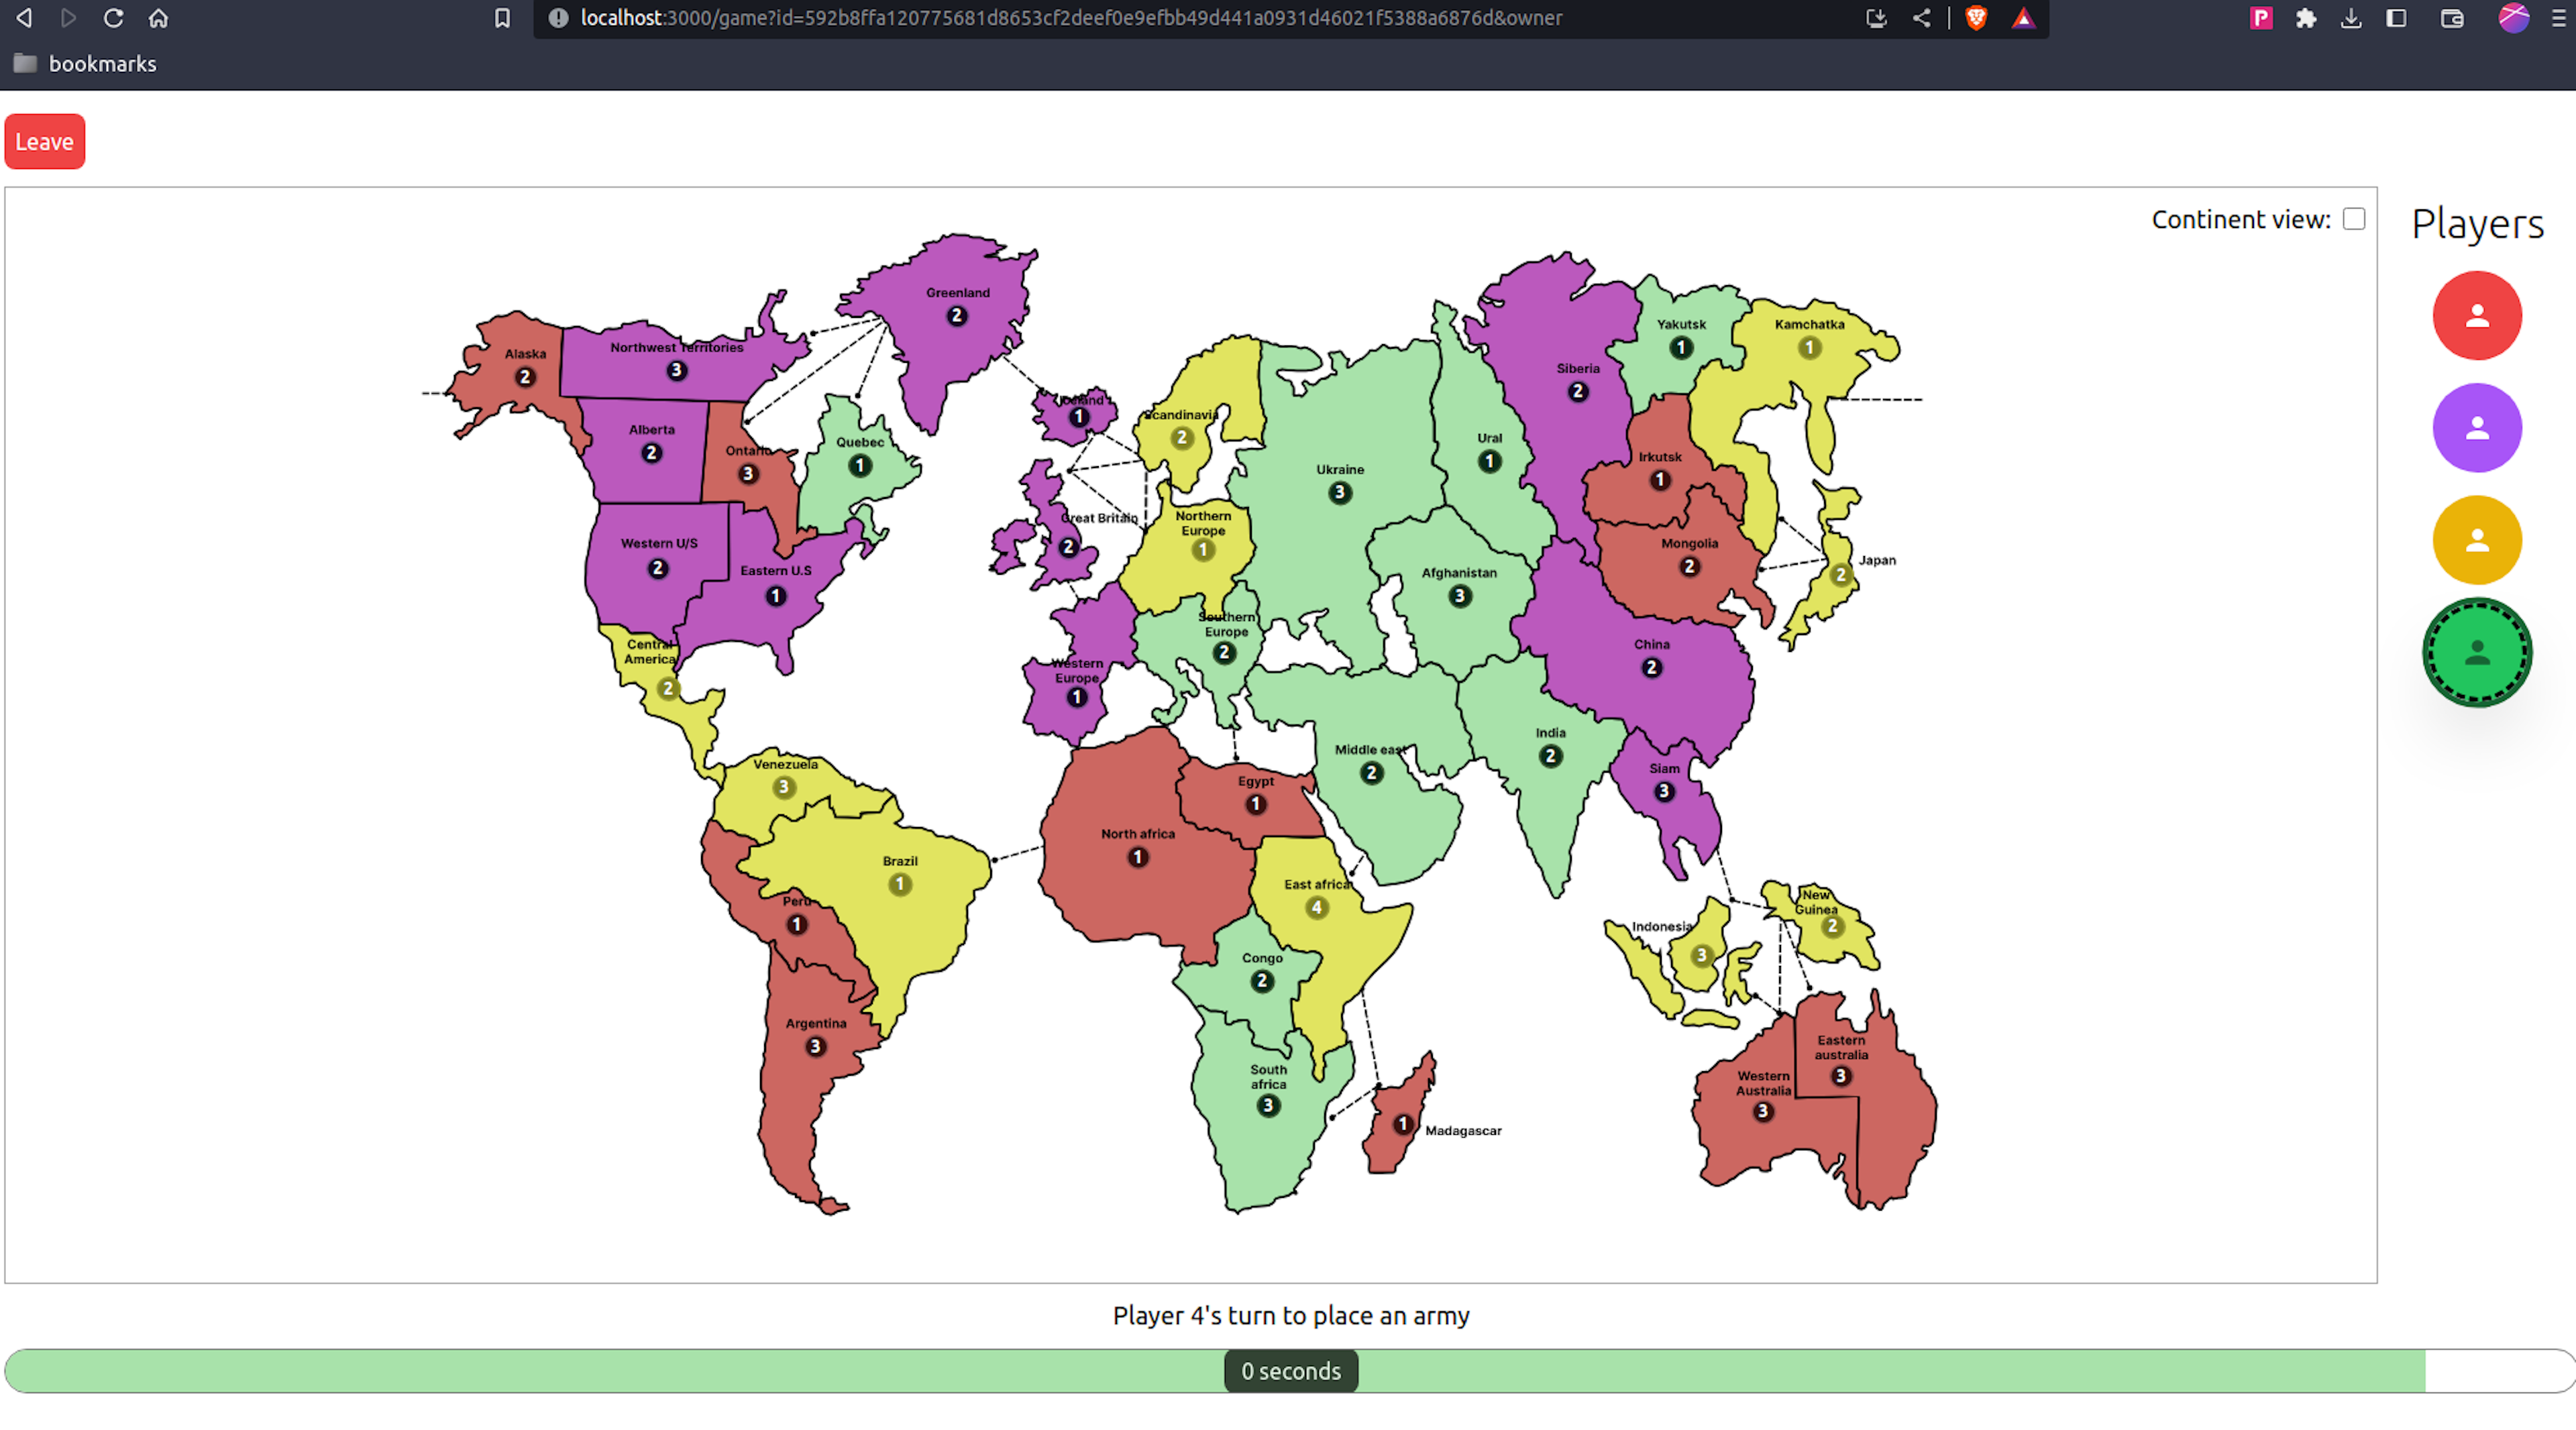 This is a multiplayer version of the popular strategy board game: Risk. I used websockets to implement realtime communication between players and manipulated SVGs to create an interactive map.